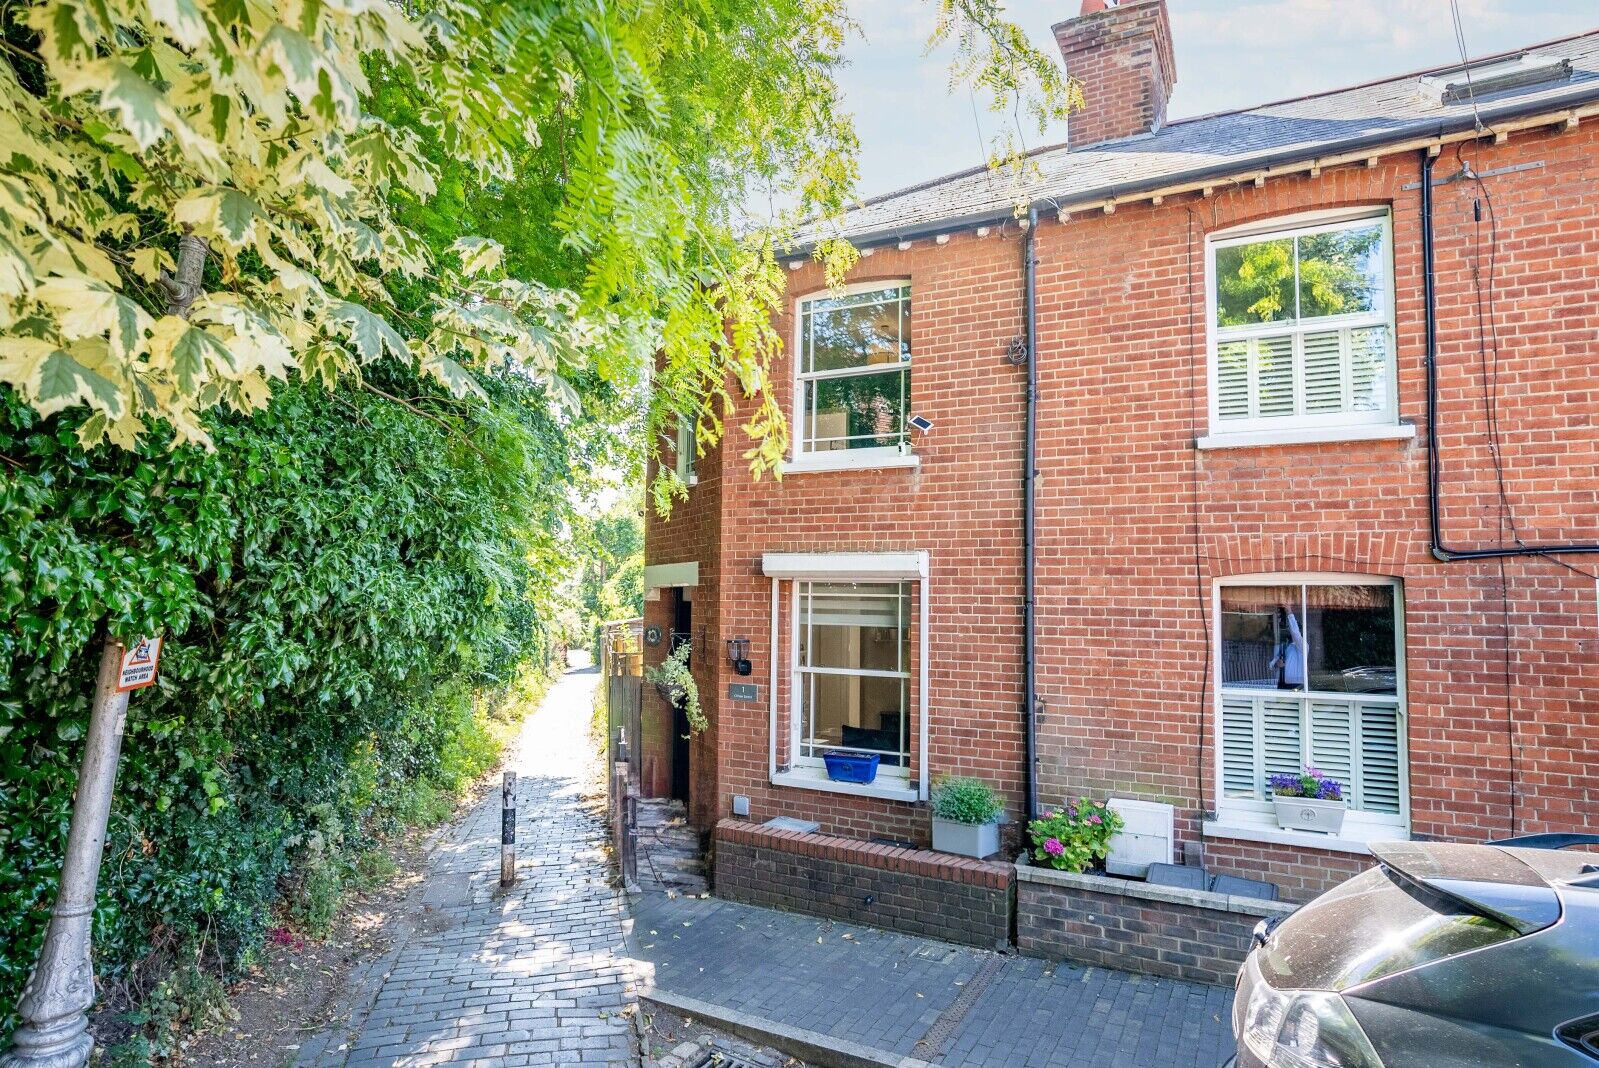 3 bedroom end terraced house for sale Clifton Street, St. Albans, AL1, main image